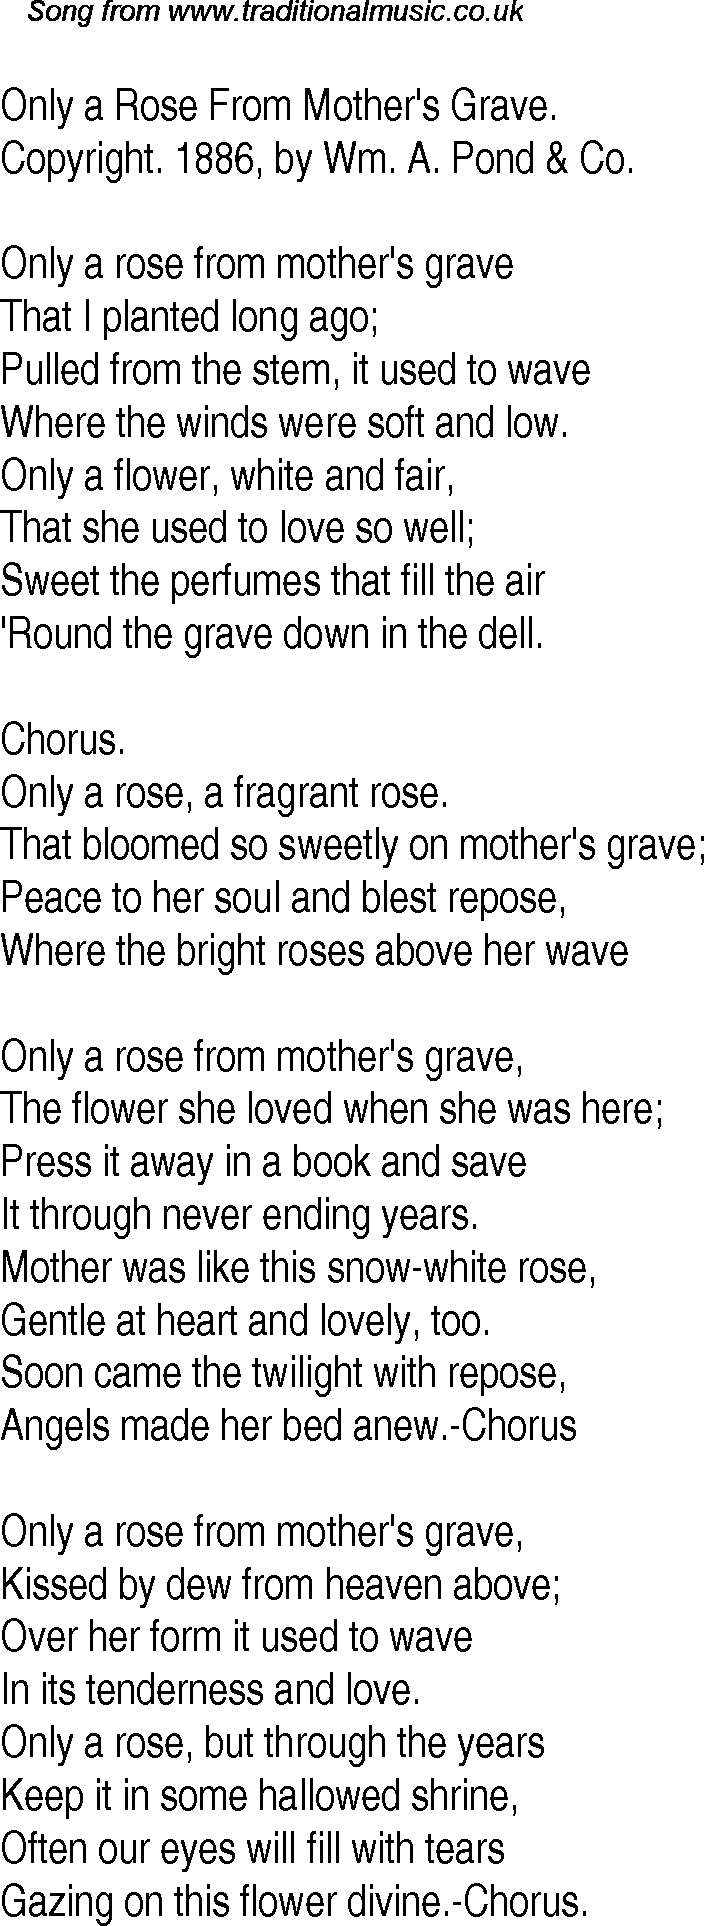 Old Time Song Lyrics For 20 Only A Rose From Mothers Grave